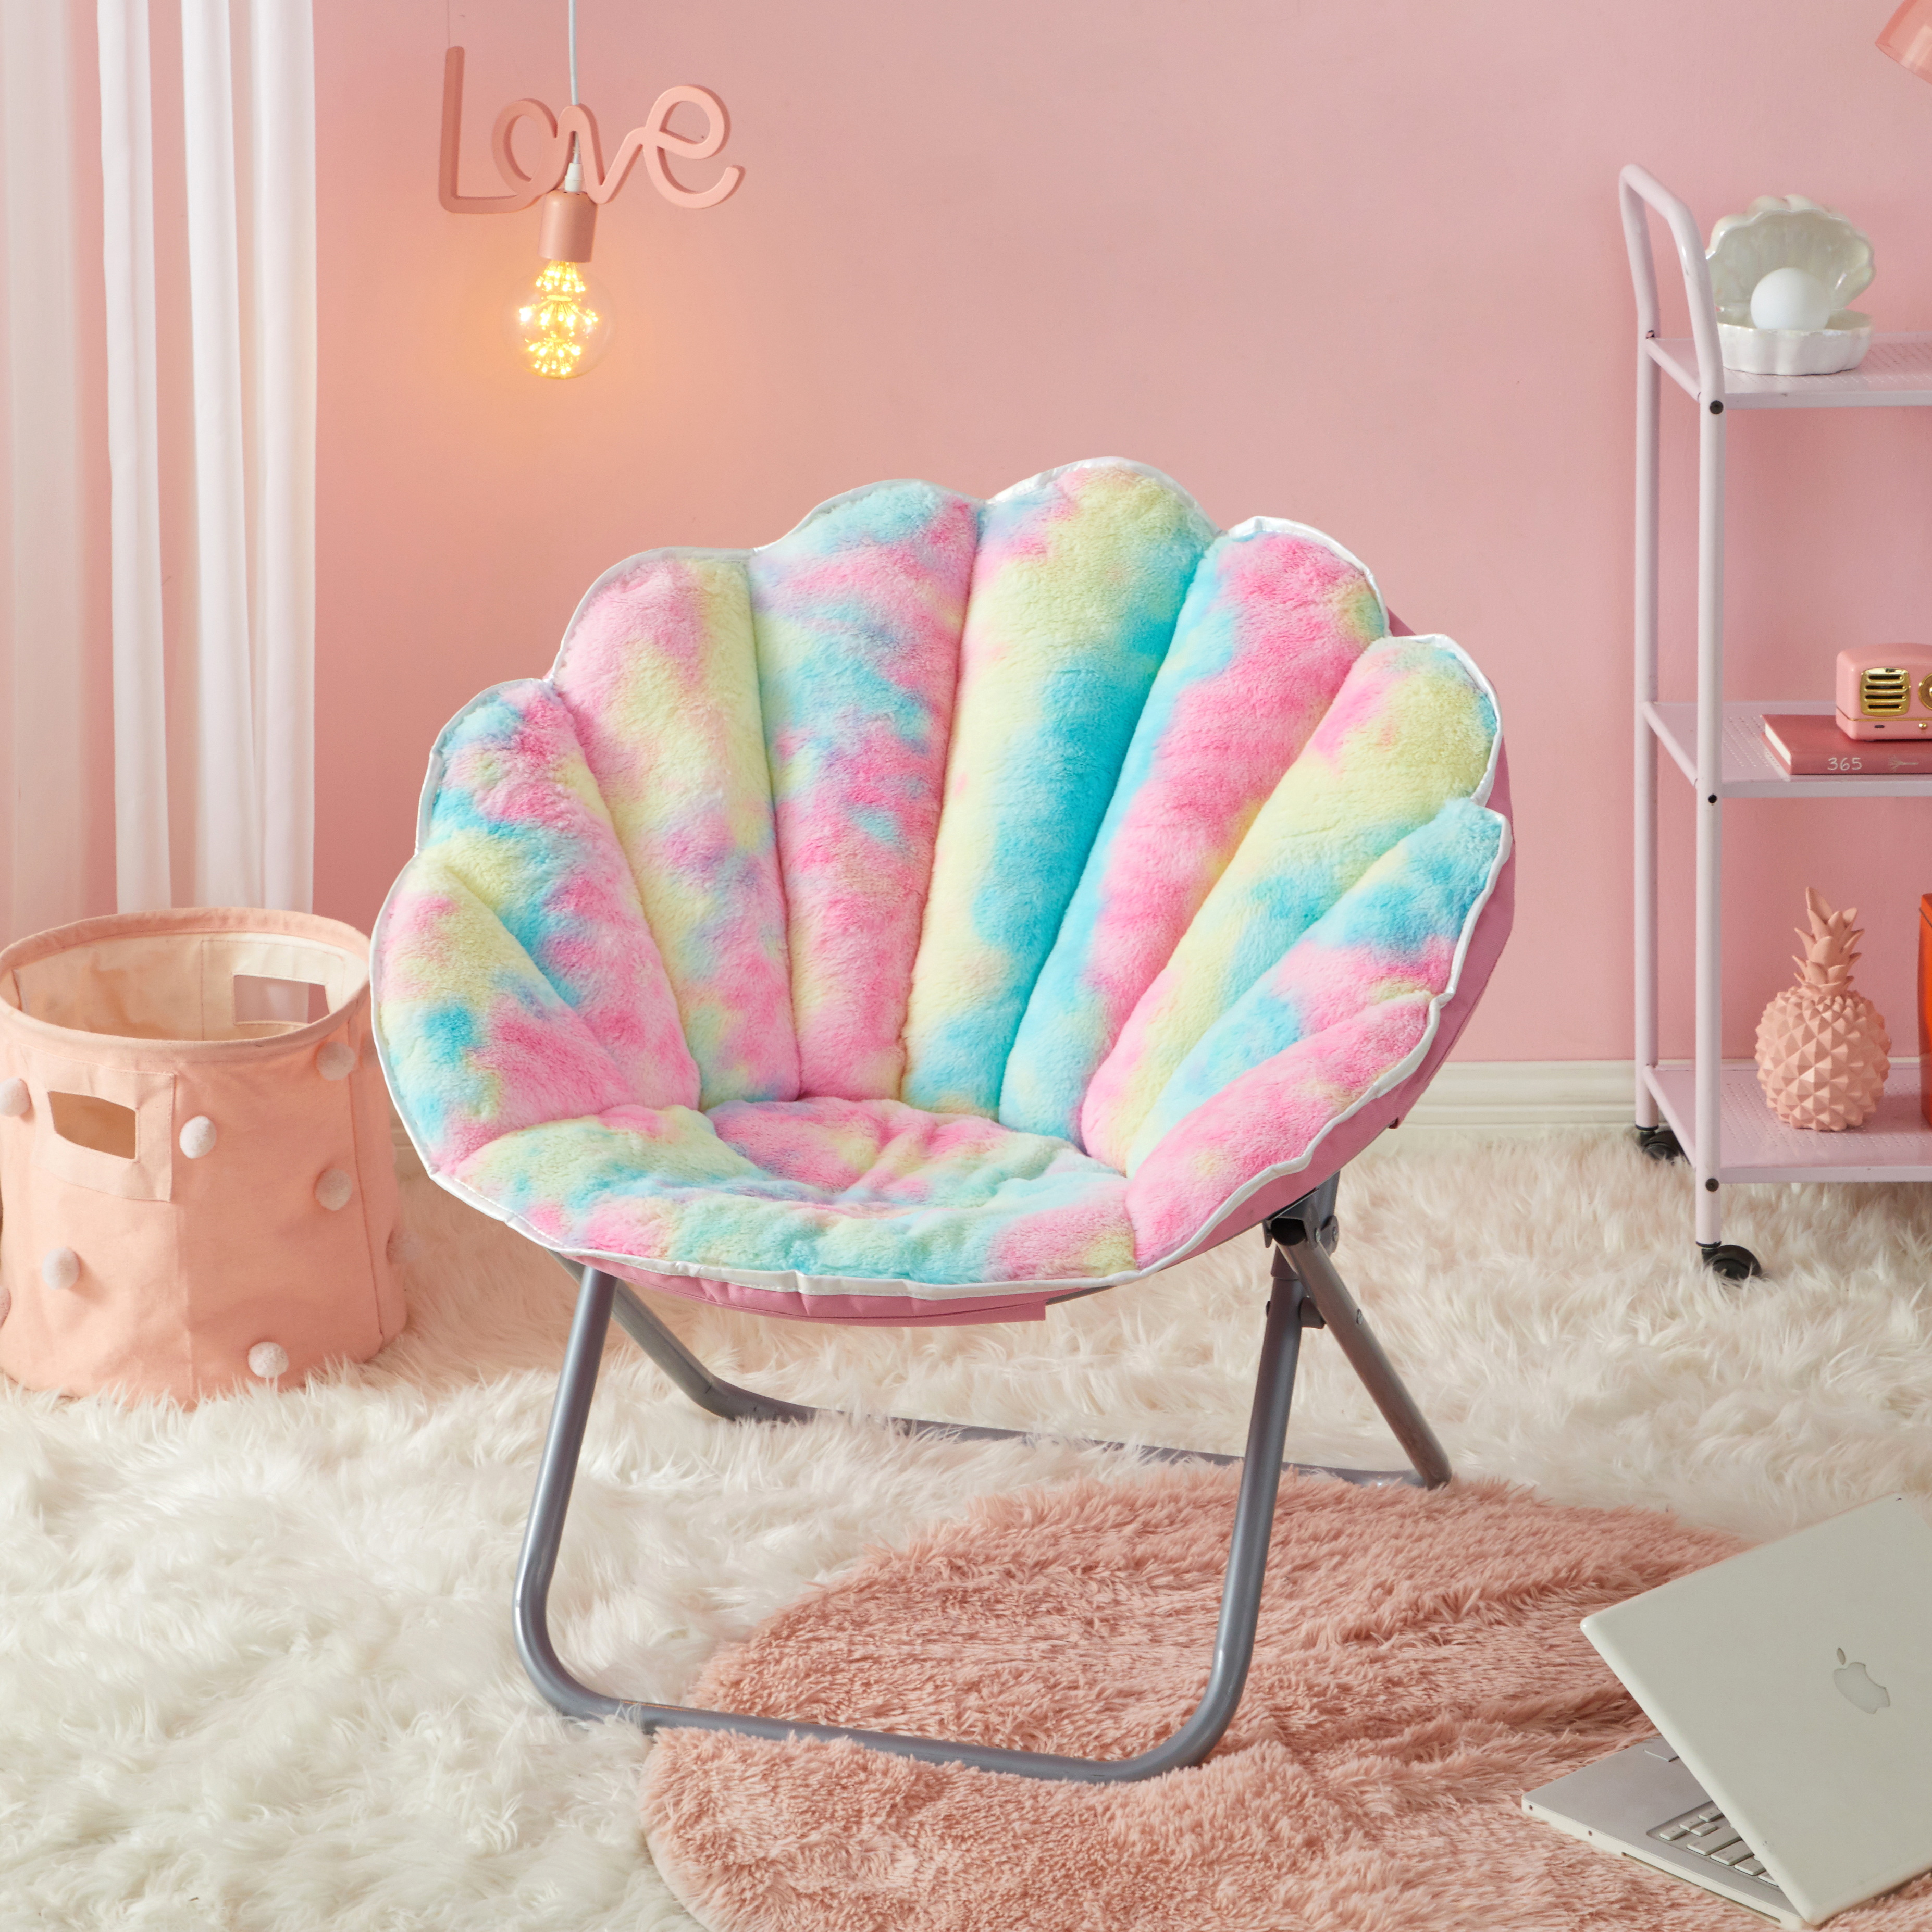 Justice Faux Fur Scallop Saucer™ Chair with Holographic Trim, Rainbow Tie Dye Pink - image 1 of 8